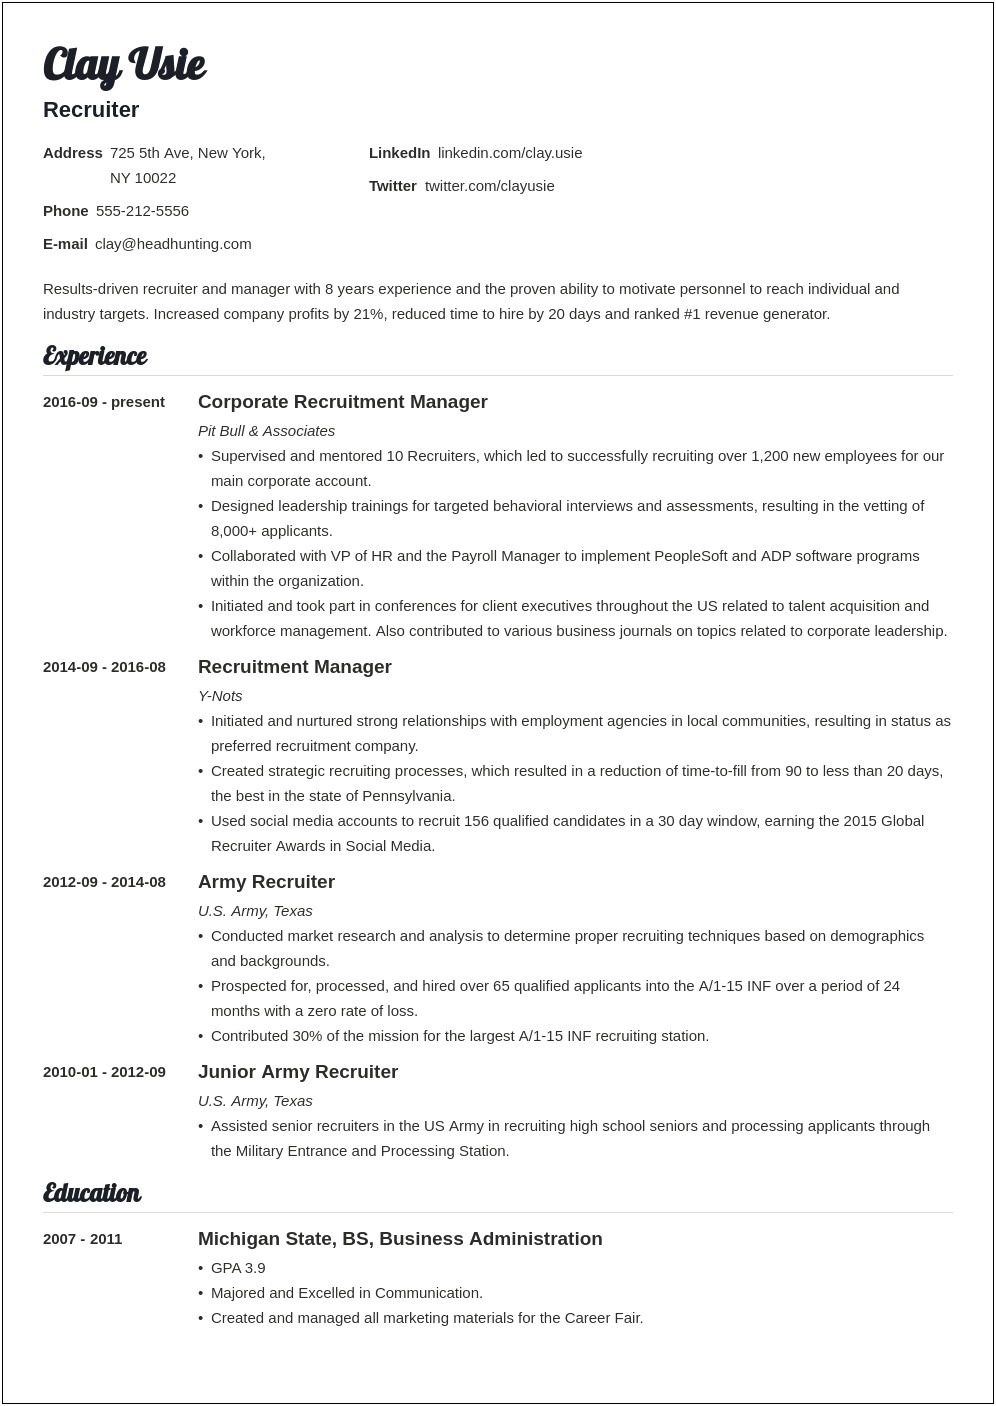 Example Of Resume For Recruiter